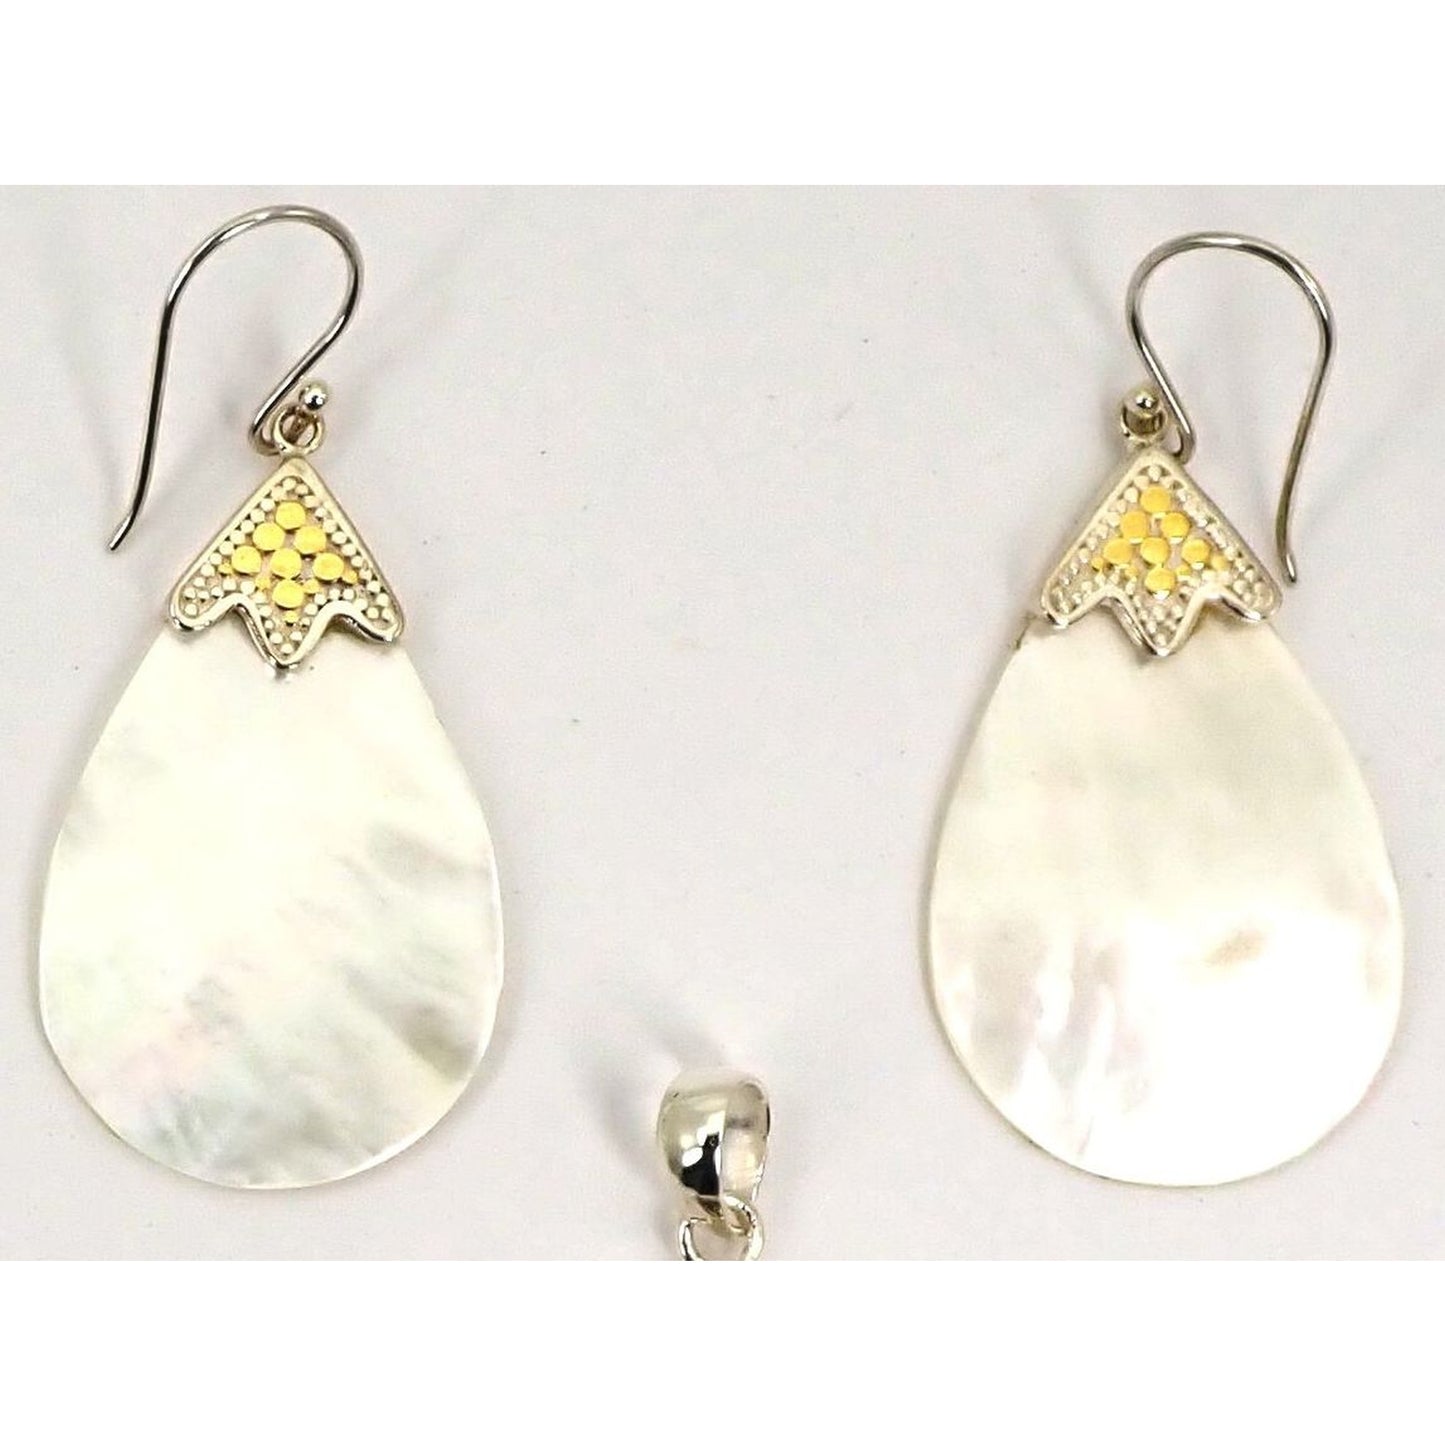 Silver and gold earrings with teardrop shell stones.